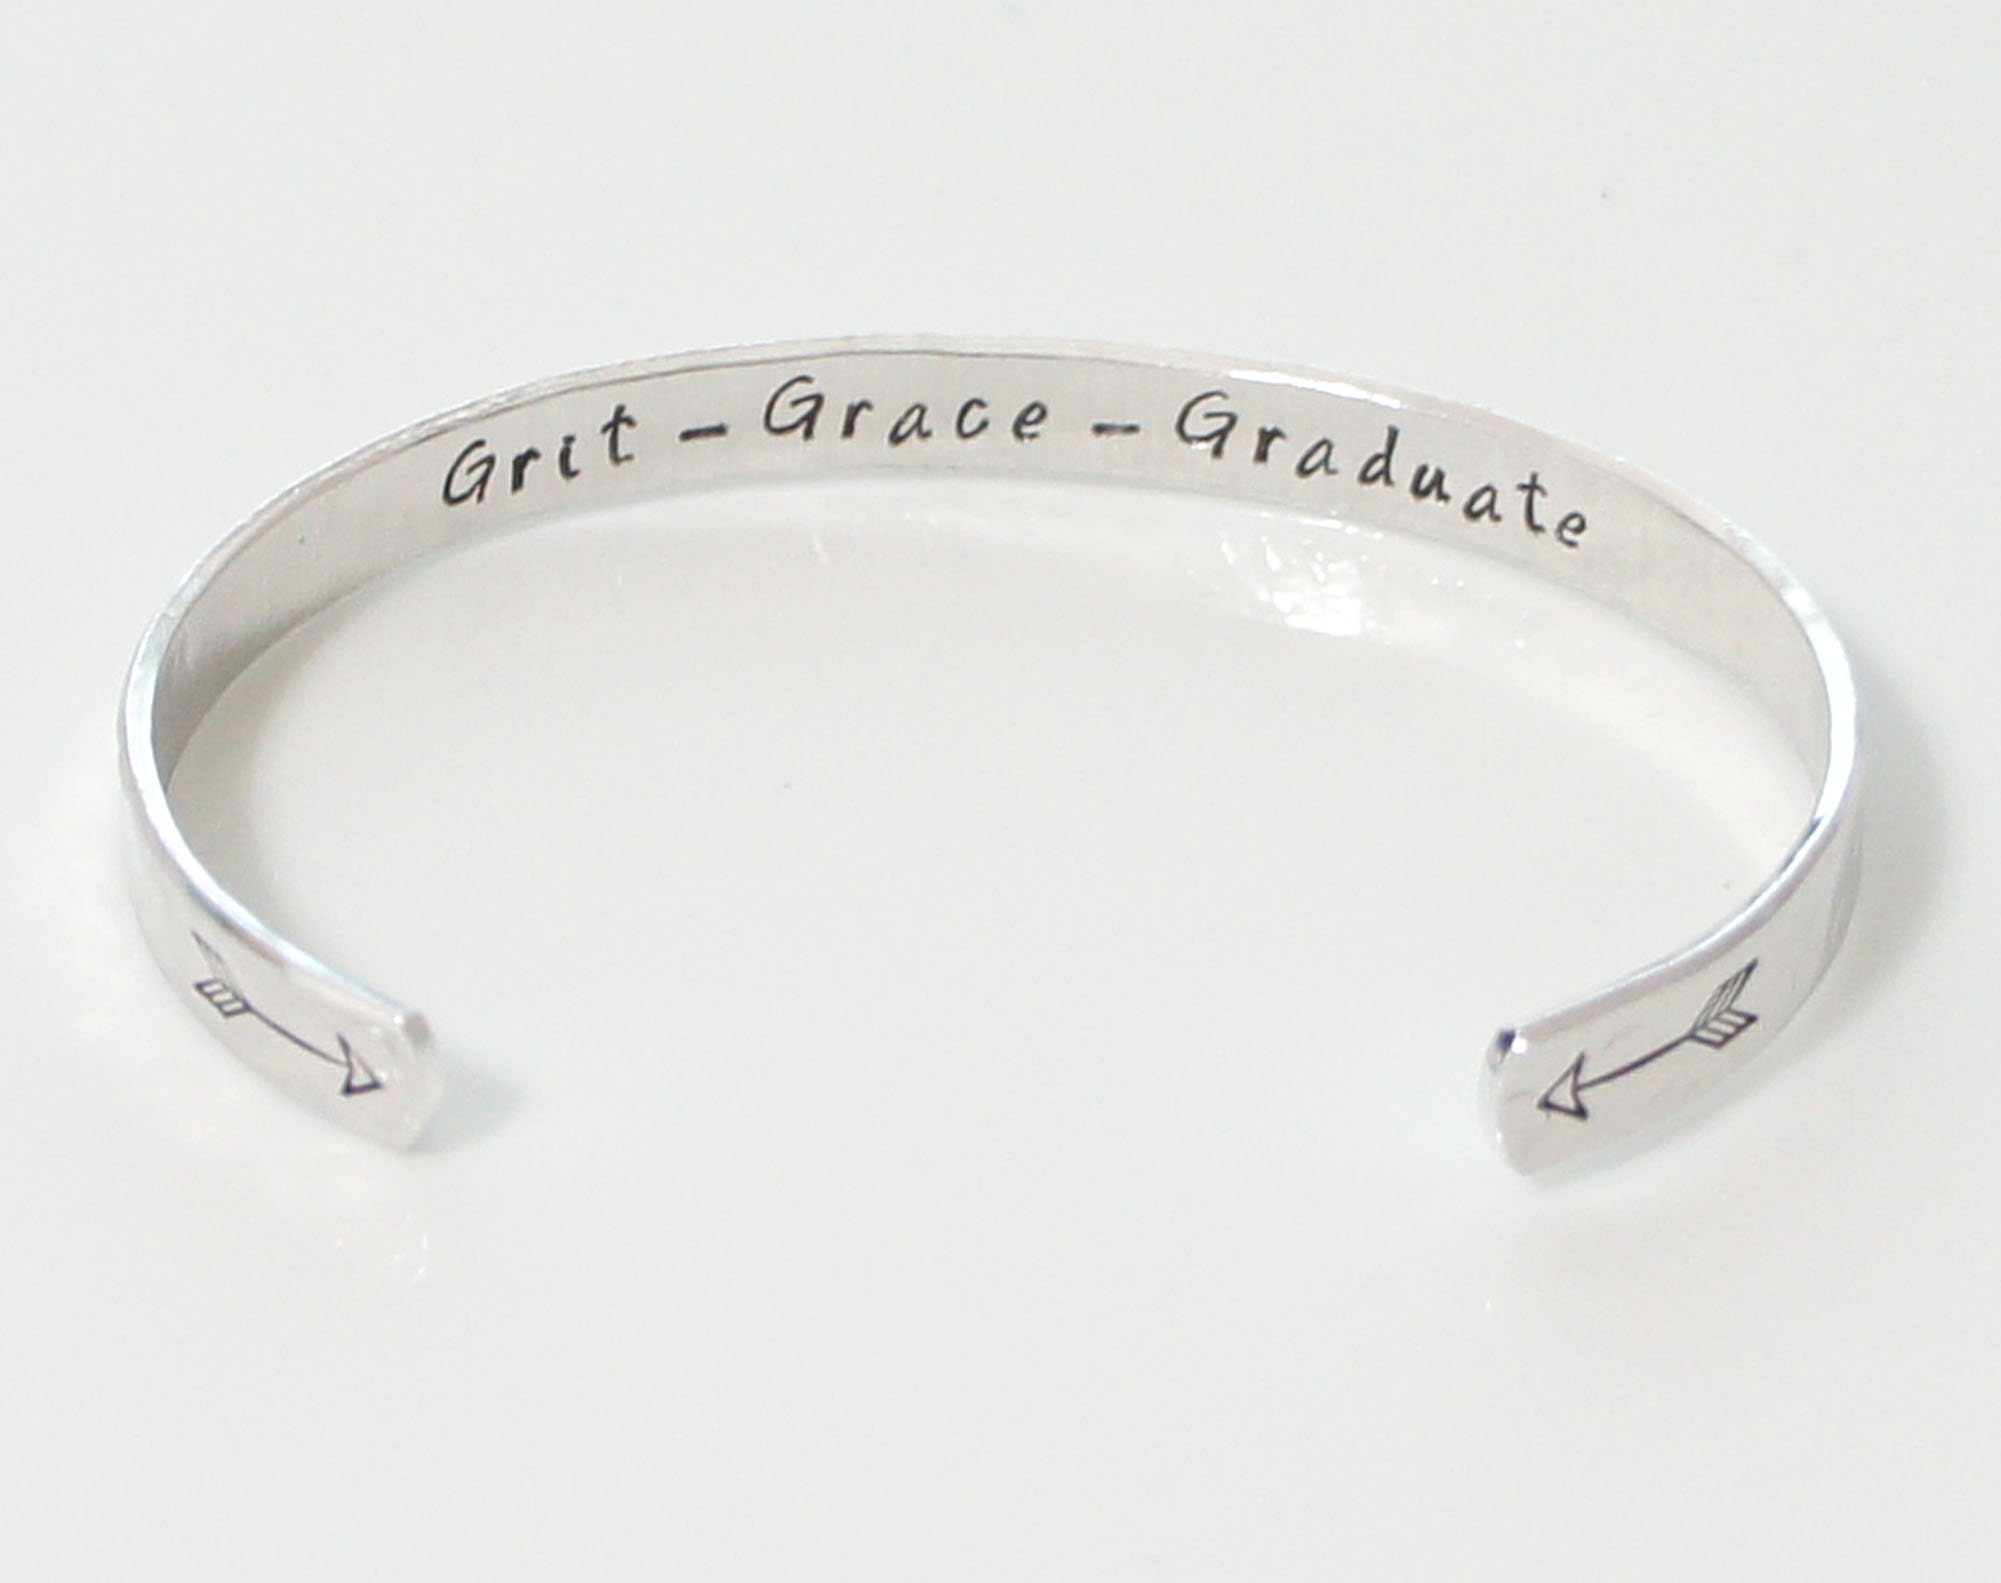 Grit and Grace Cuff Bracelet - Entrepreneur Jewelry - Gifts for Her